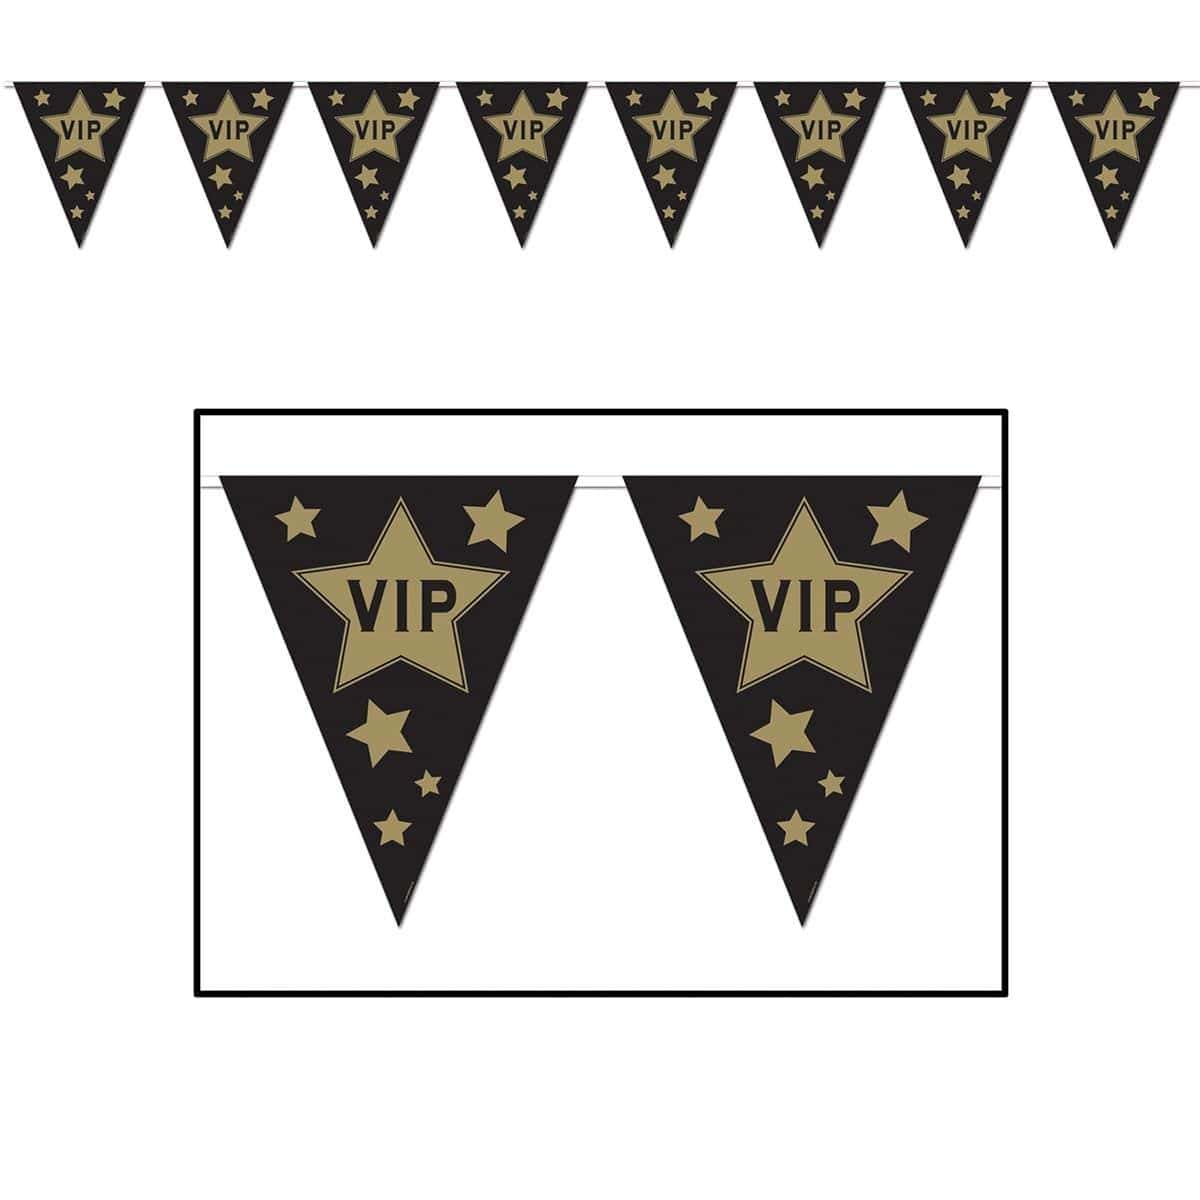 Buy Theme Party VIP Pennant Banner sold at Party Expert